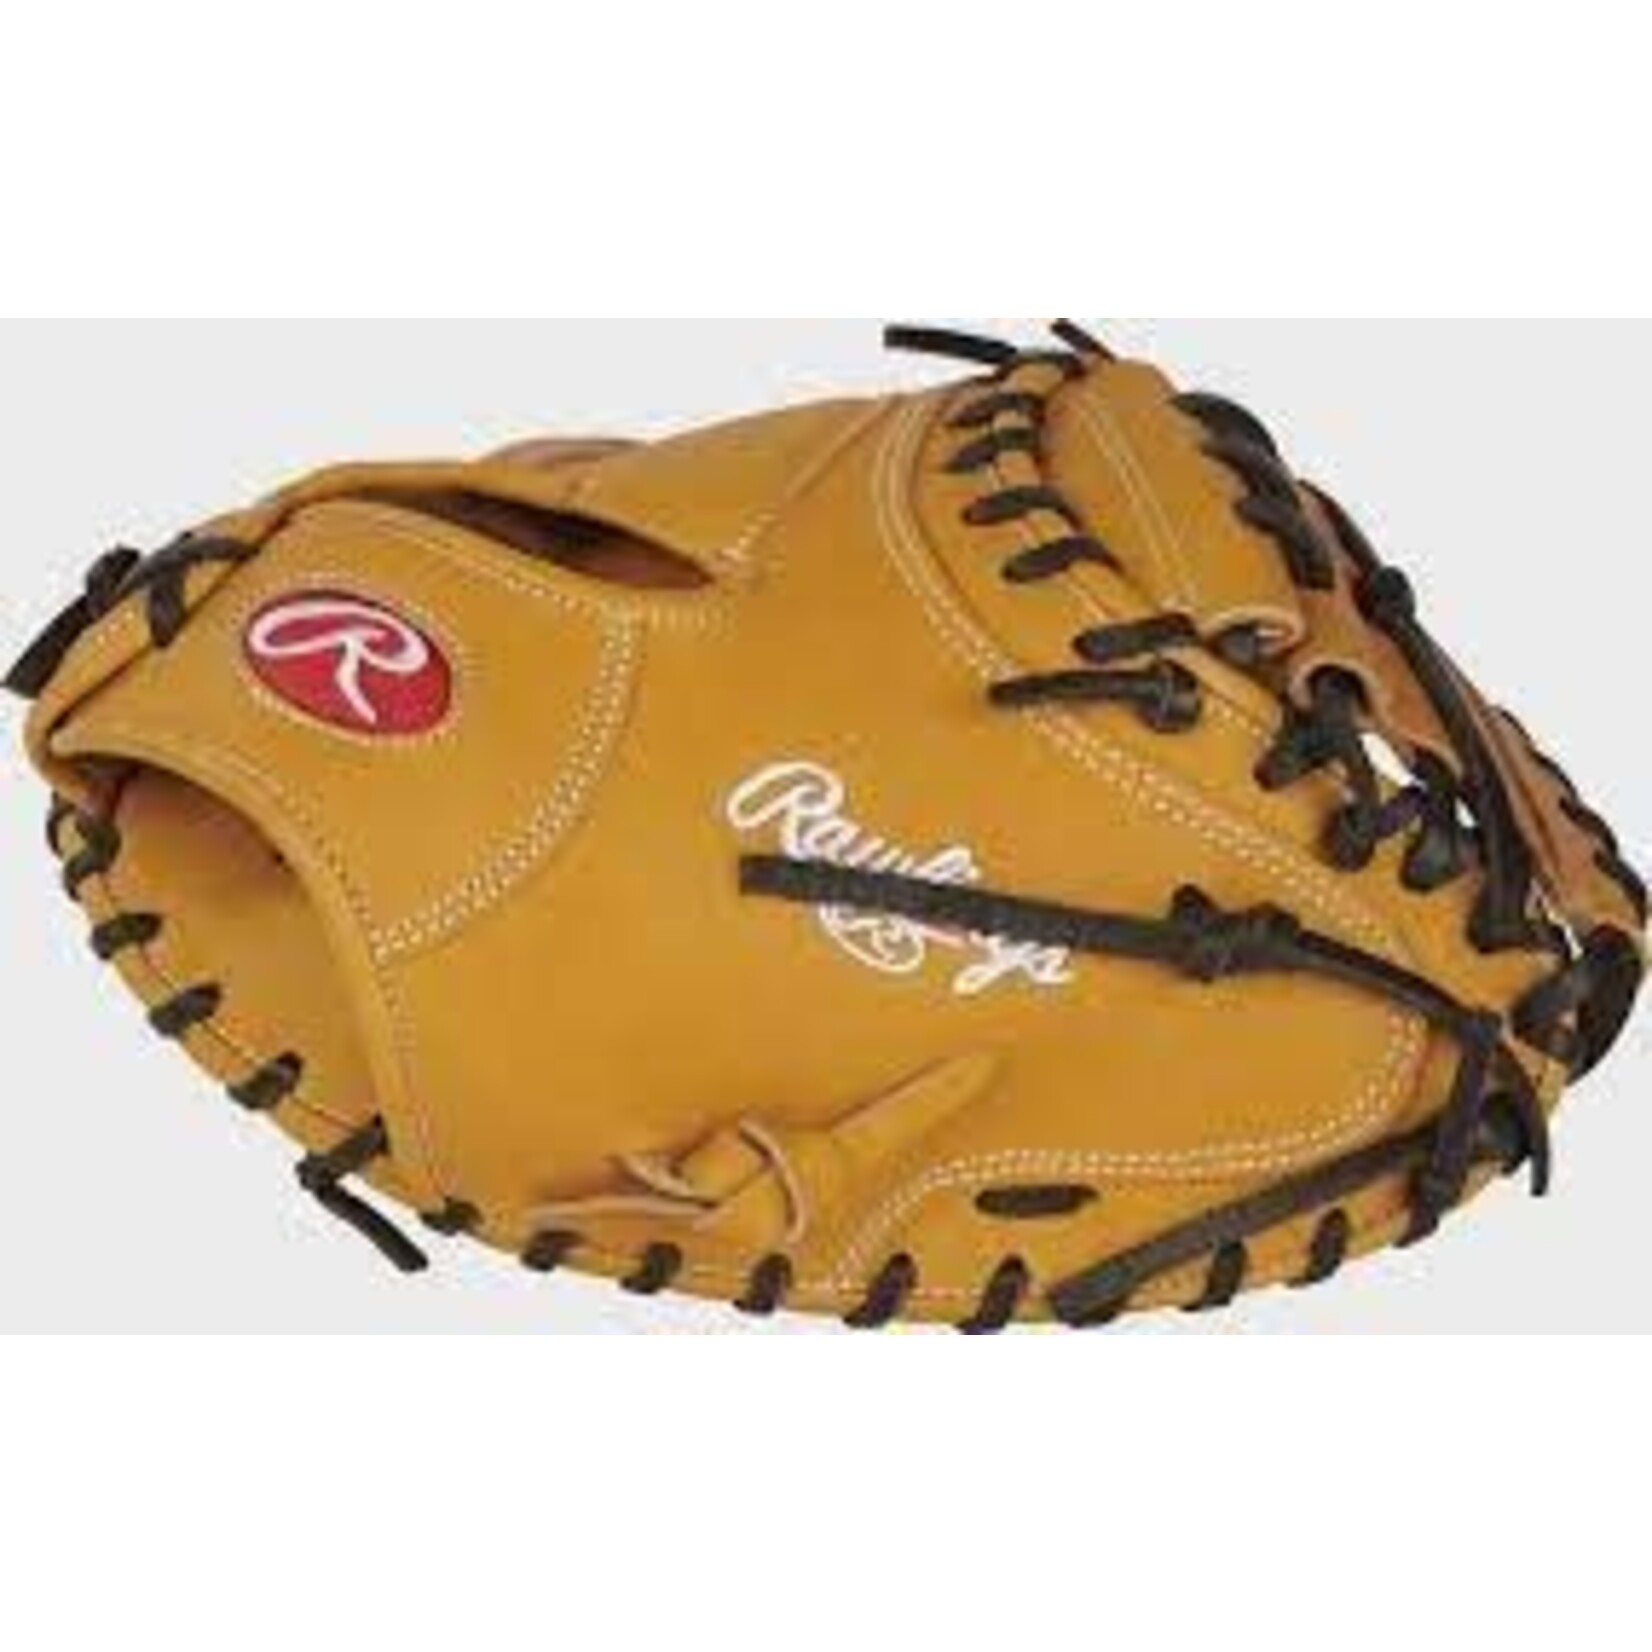 Rawlings Rawlings Heart of the Hide PROTCM33T 33 Inch